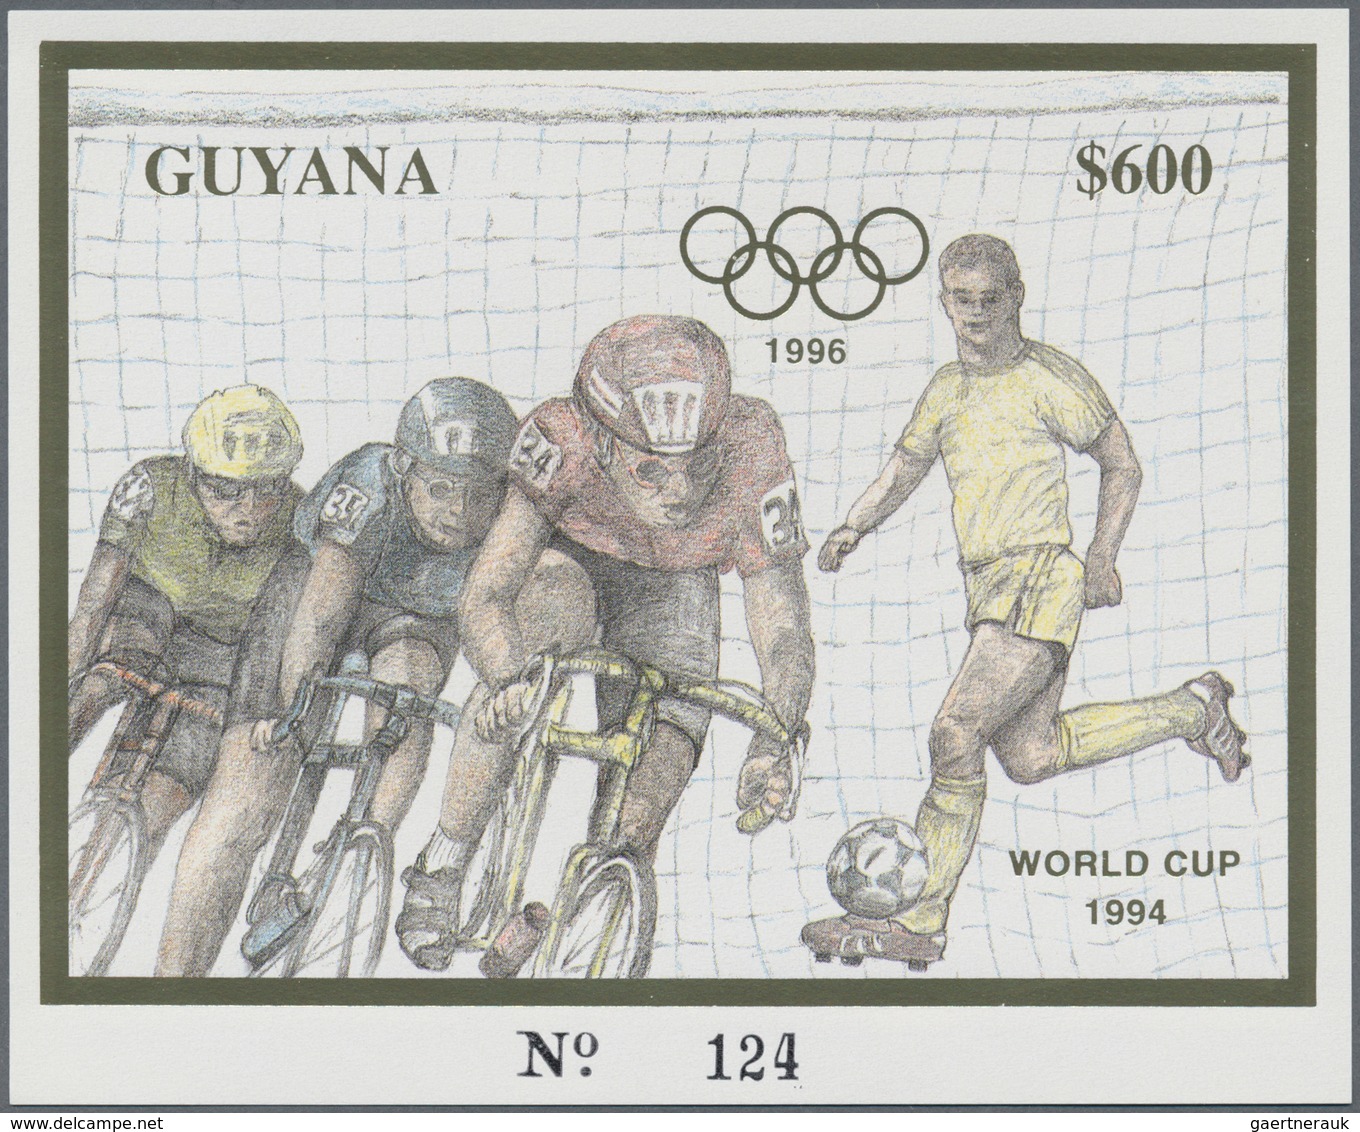 25359 Thematik: Olympische Spiele / olympic games: 1993, Guyana. Complete set of 5 times 2 GOLD and SILVER